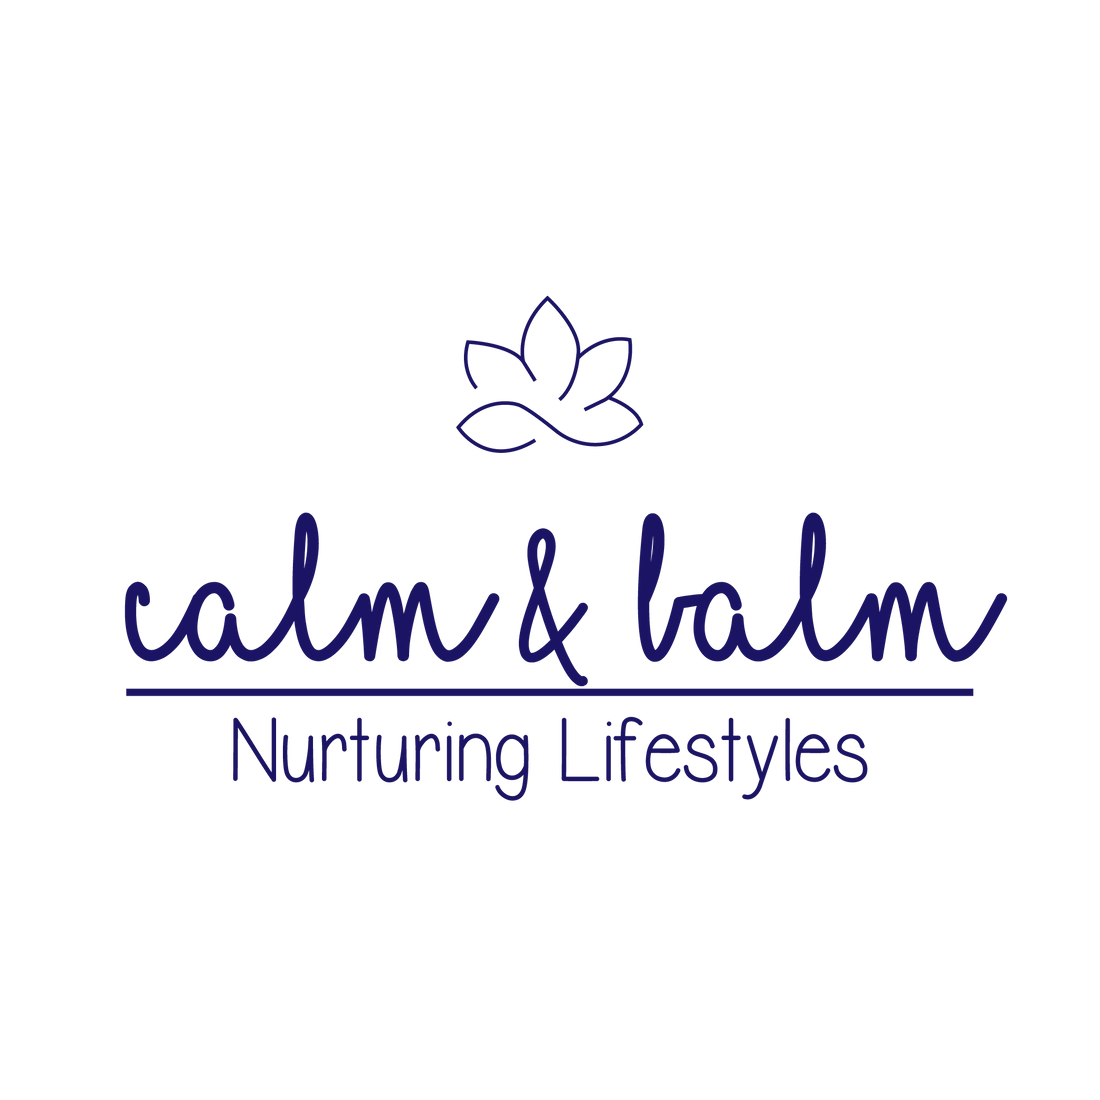 About Calm and Balm!